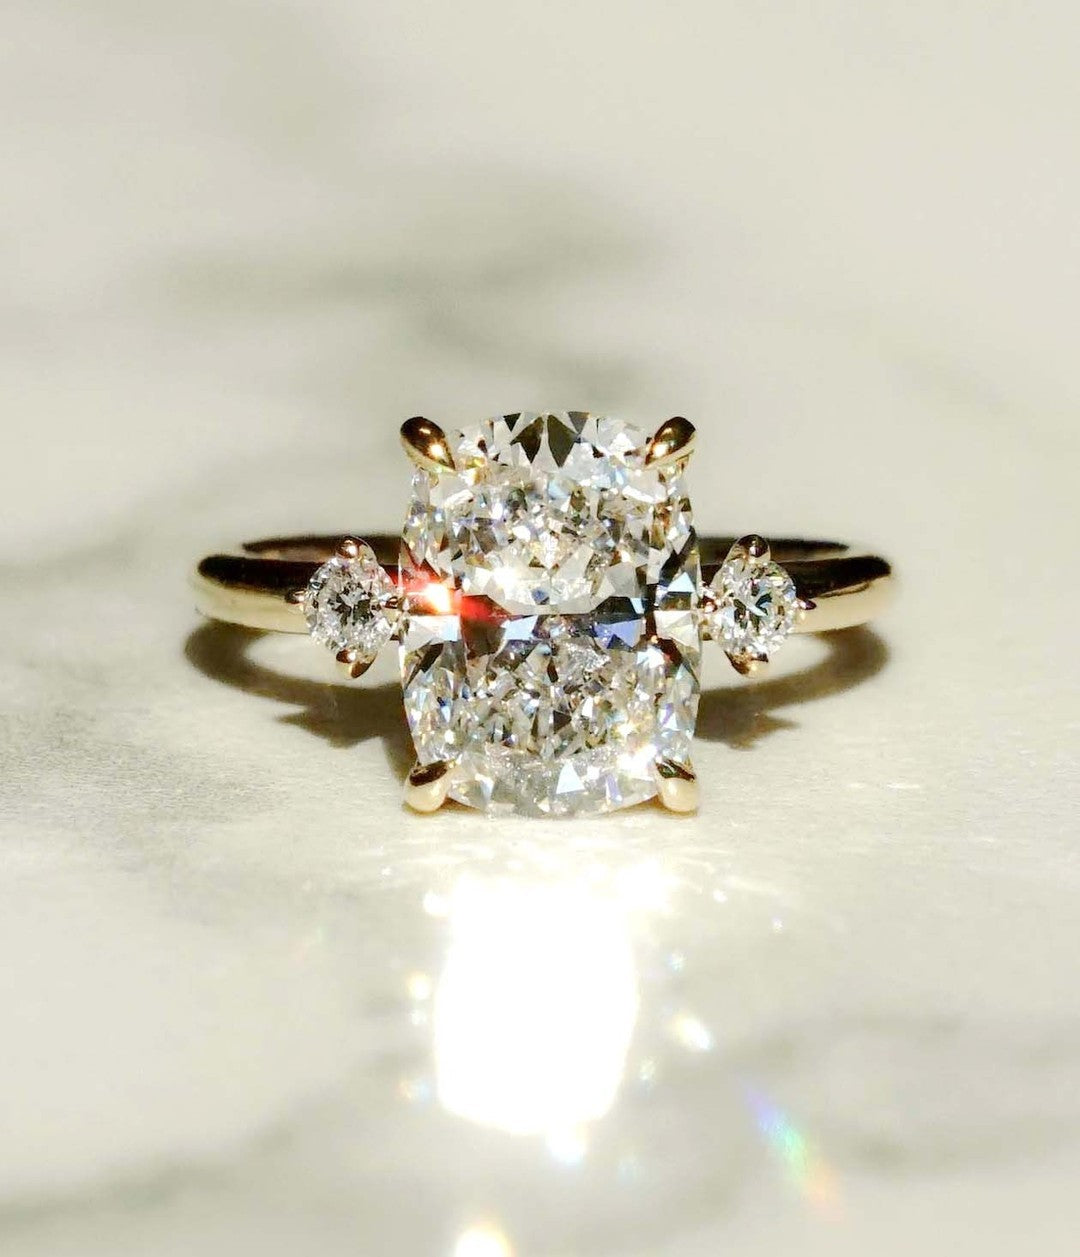 2.6Ct White Cushion Cut Solitaire Ring | Engagement Proposal Ring | Unique Ring | Delicate Solo Ring